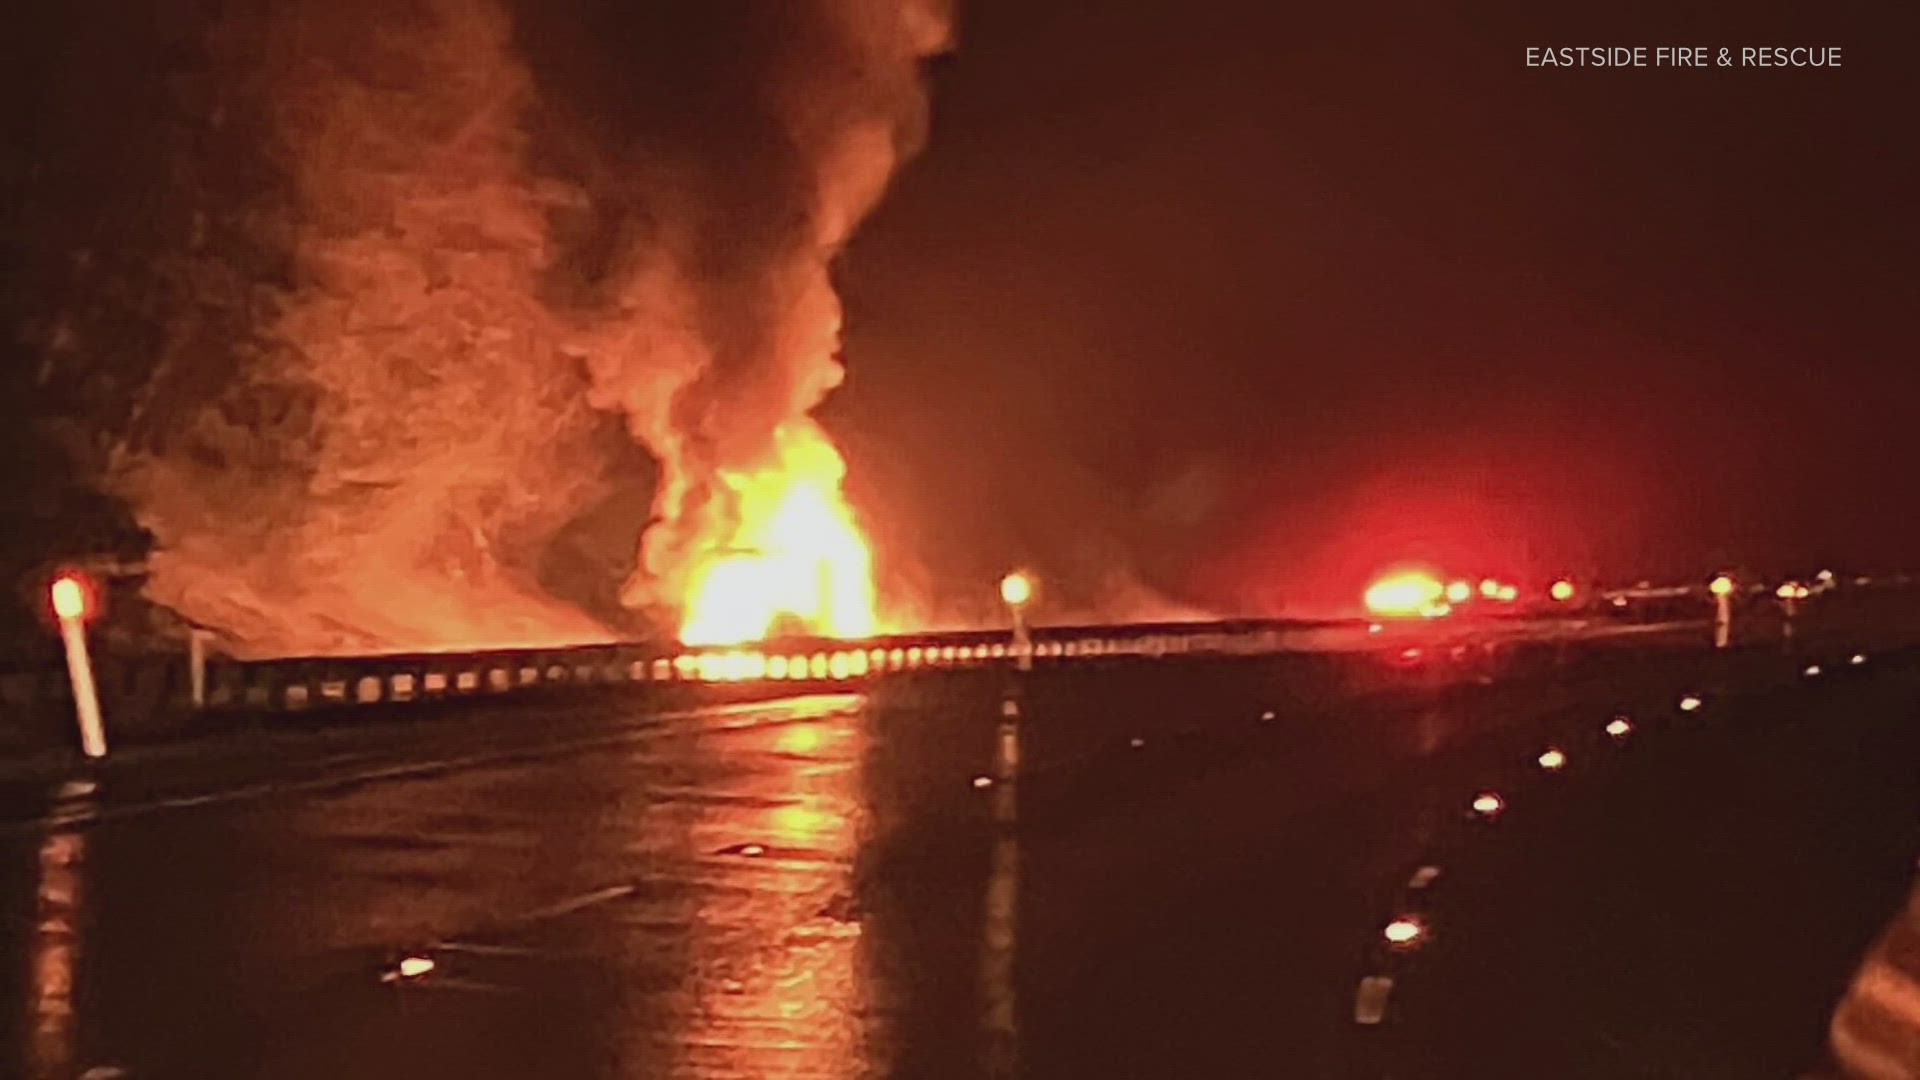 Both directions of Interstate 90 near milepost 42 were closed due to an RV fire. The eastbound lanes reopened shortly before 9 p.m.